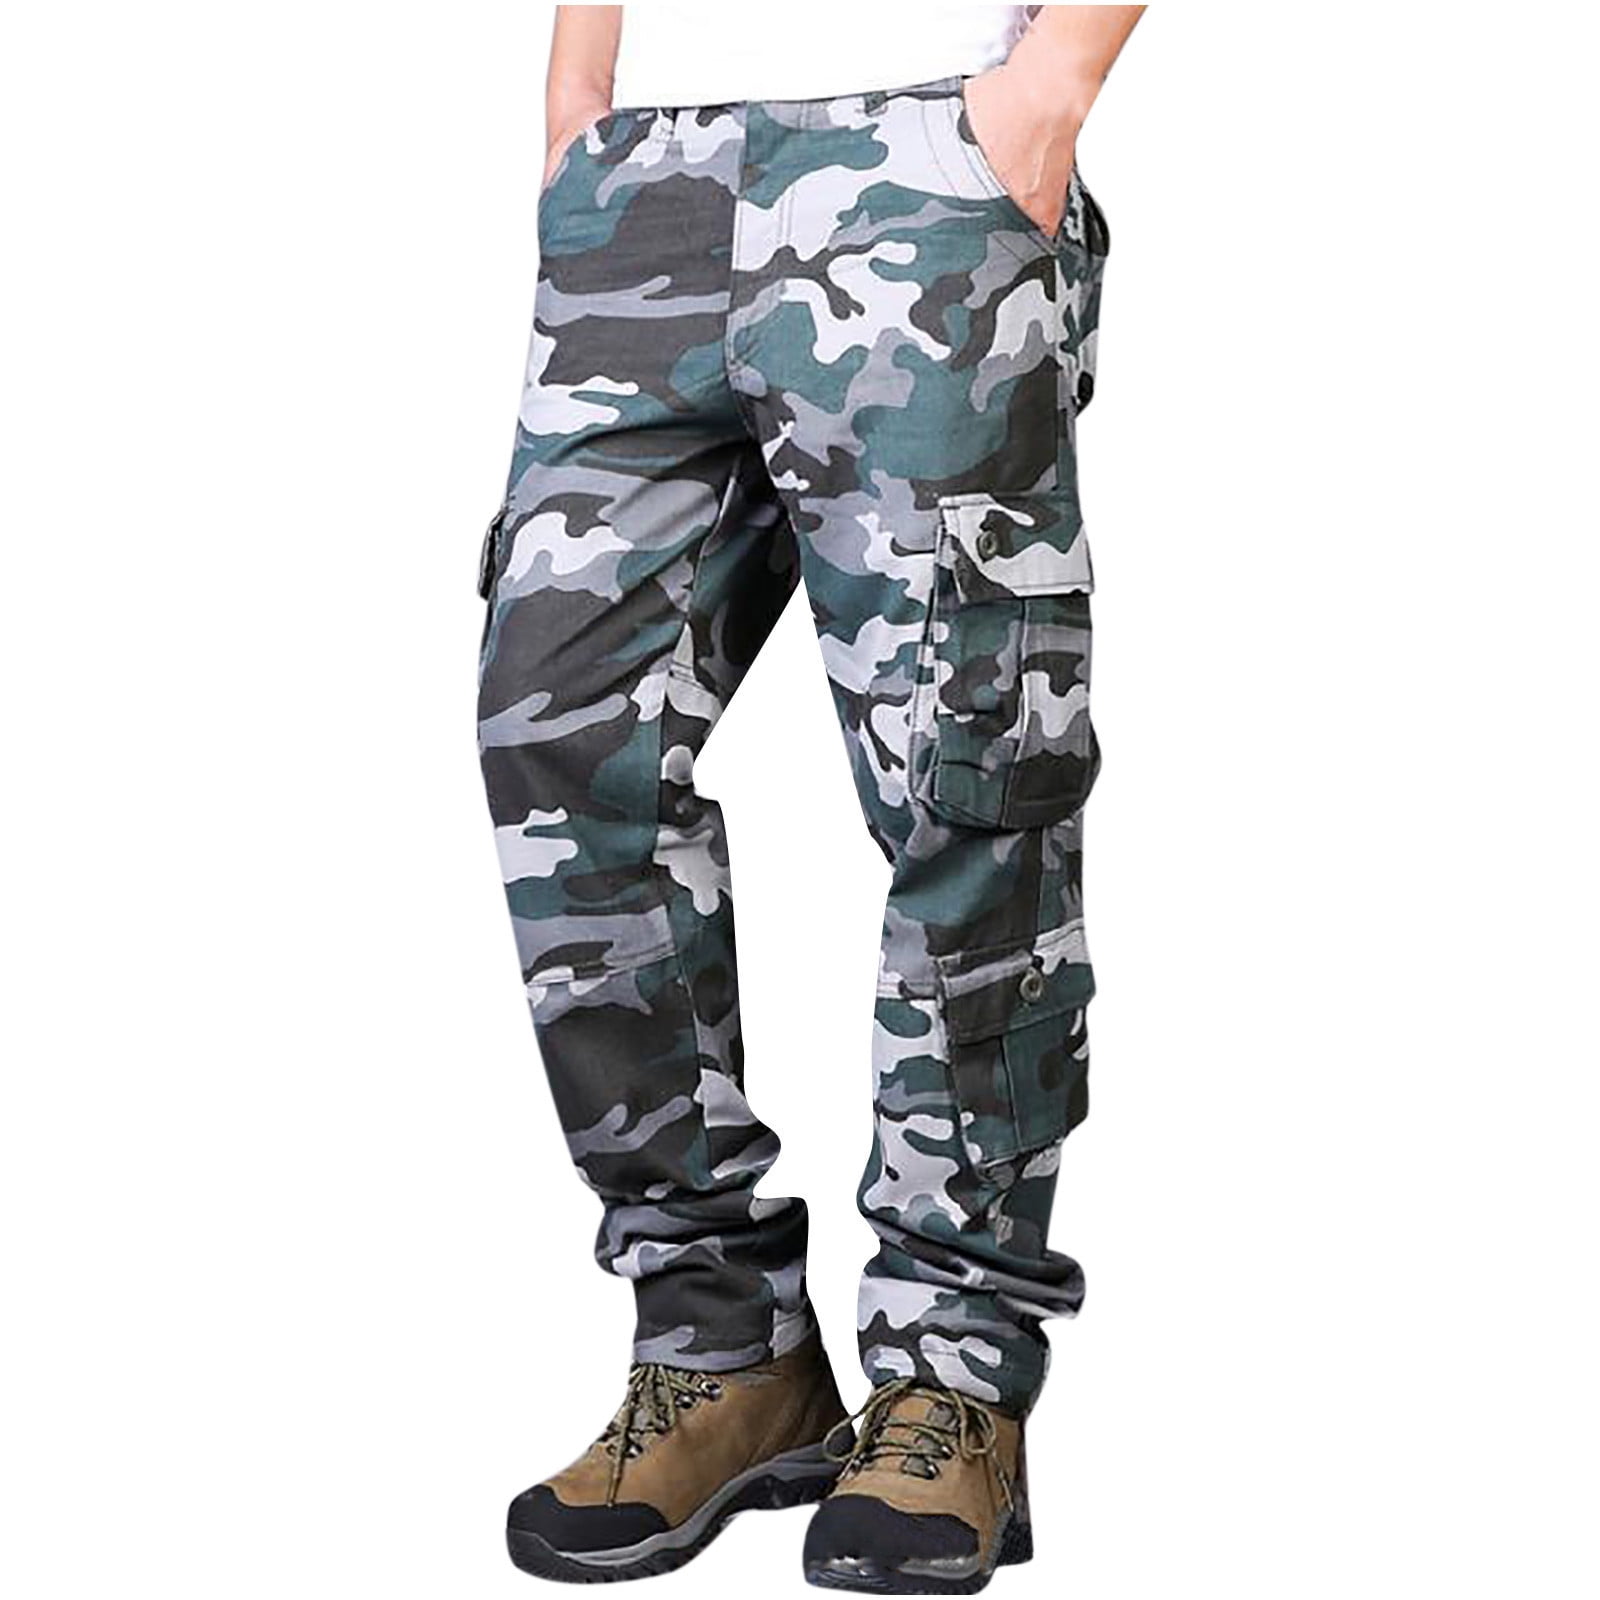 Men's Multi-Pockets Work Pants 100% Cotton Tactical Military Army Cargo  Pants